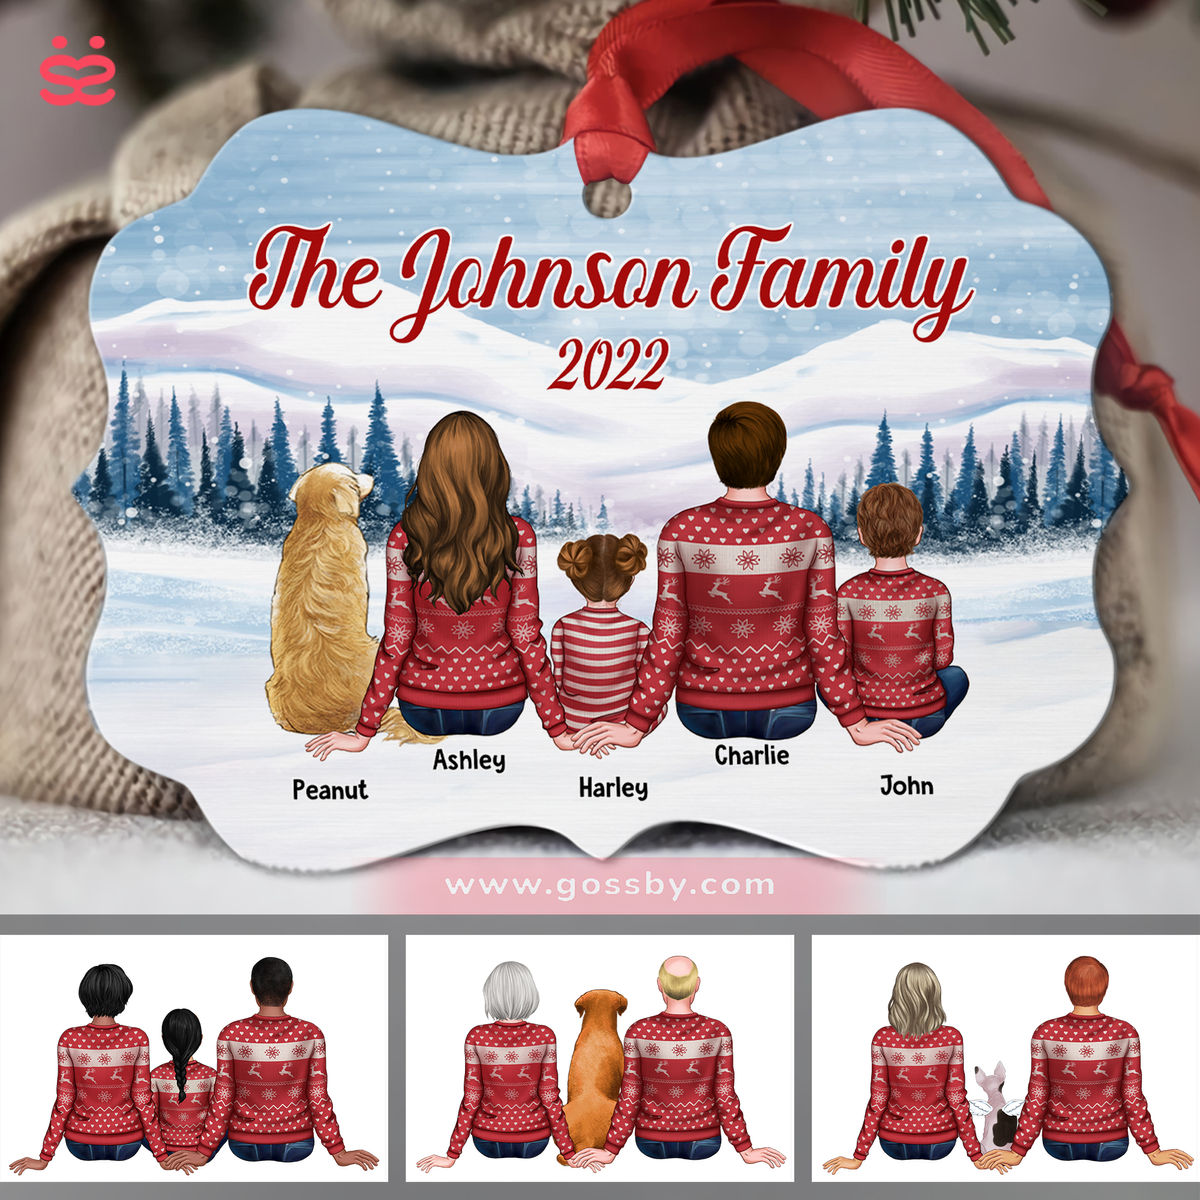 Personalized Ornament - Christmas Ornament - Christmas Gifts - Family Ugly Sweatshirt In Snow Back View Personalized - Custom Ornament (Christmas Gifts For Women, Men, Family Members)